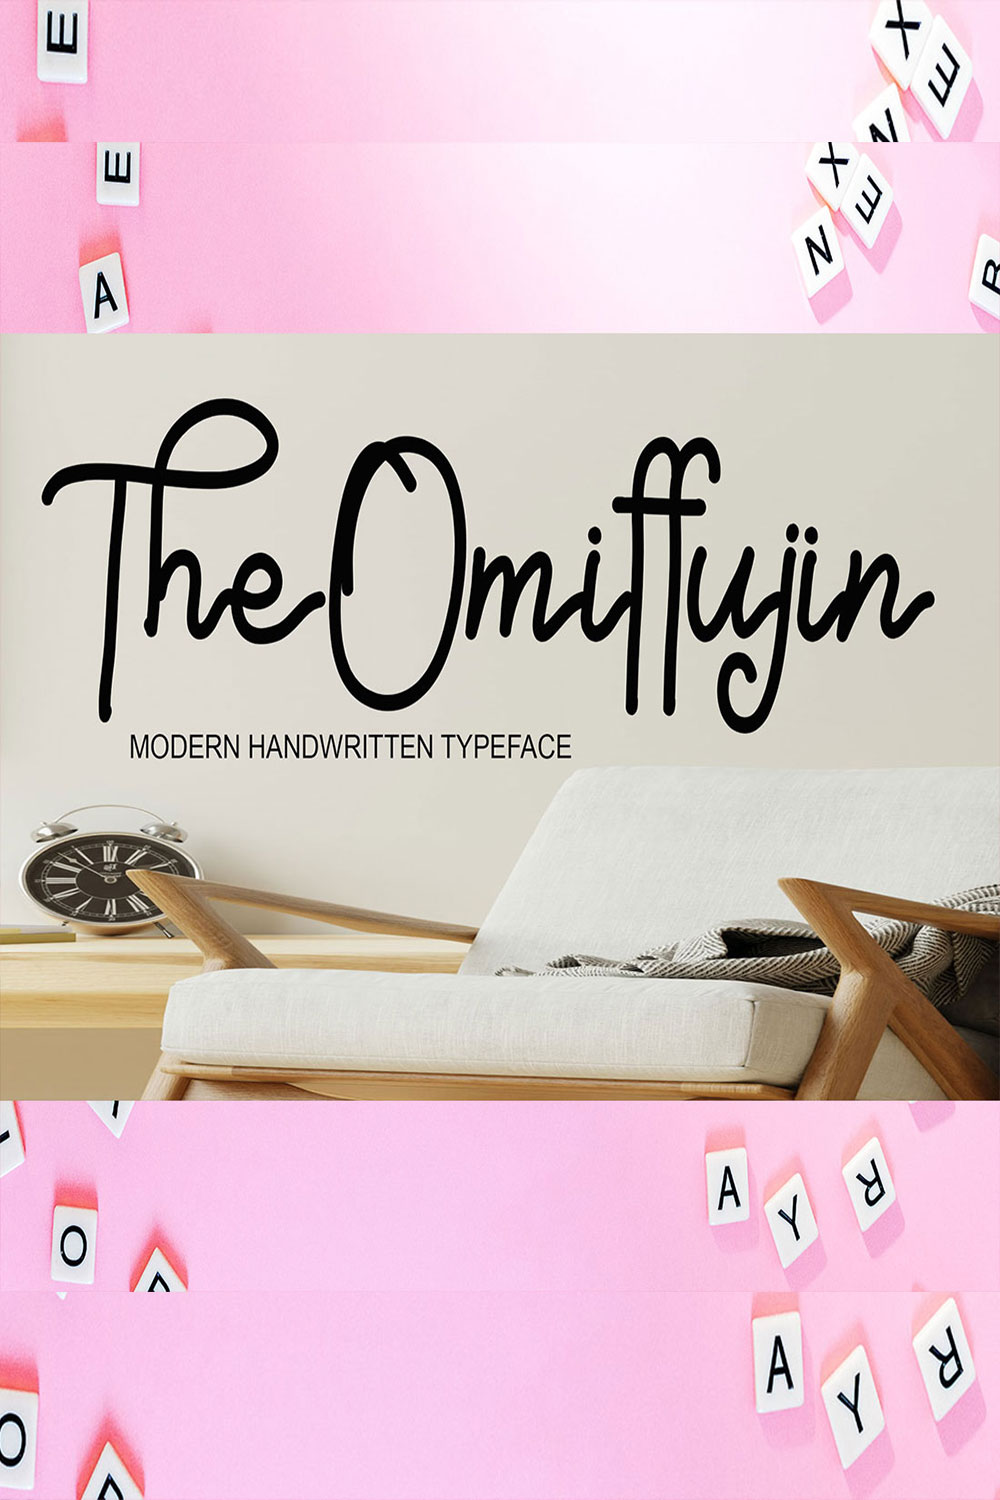 An image with text showing the beautiful font The Omiffujin/